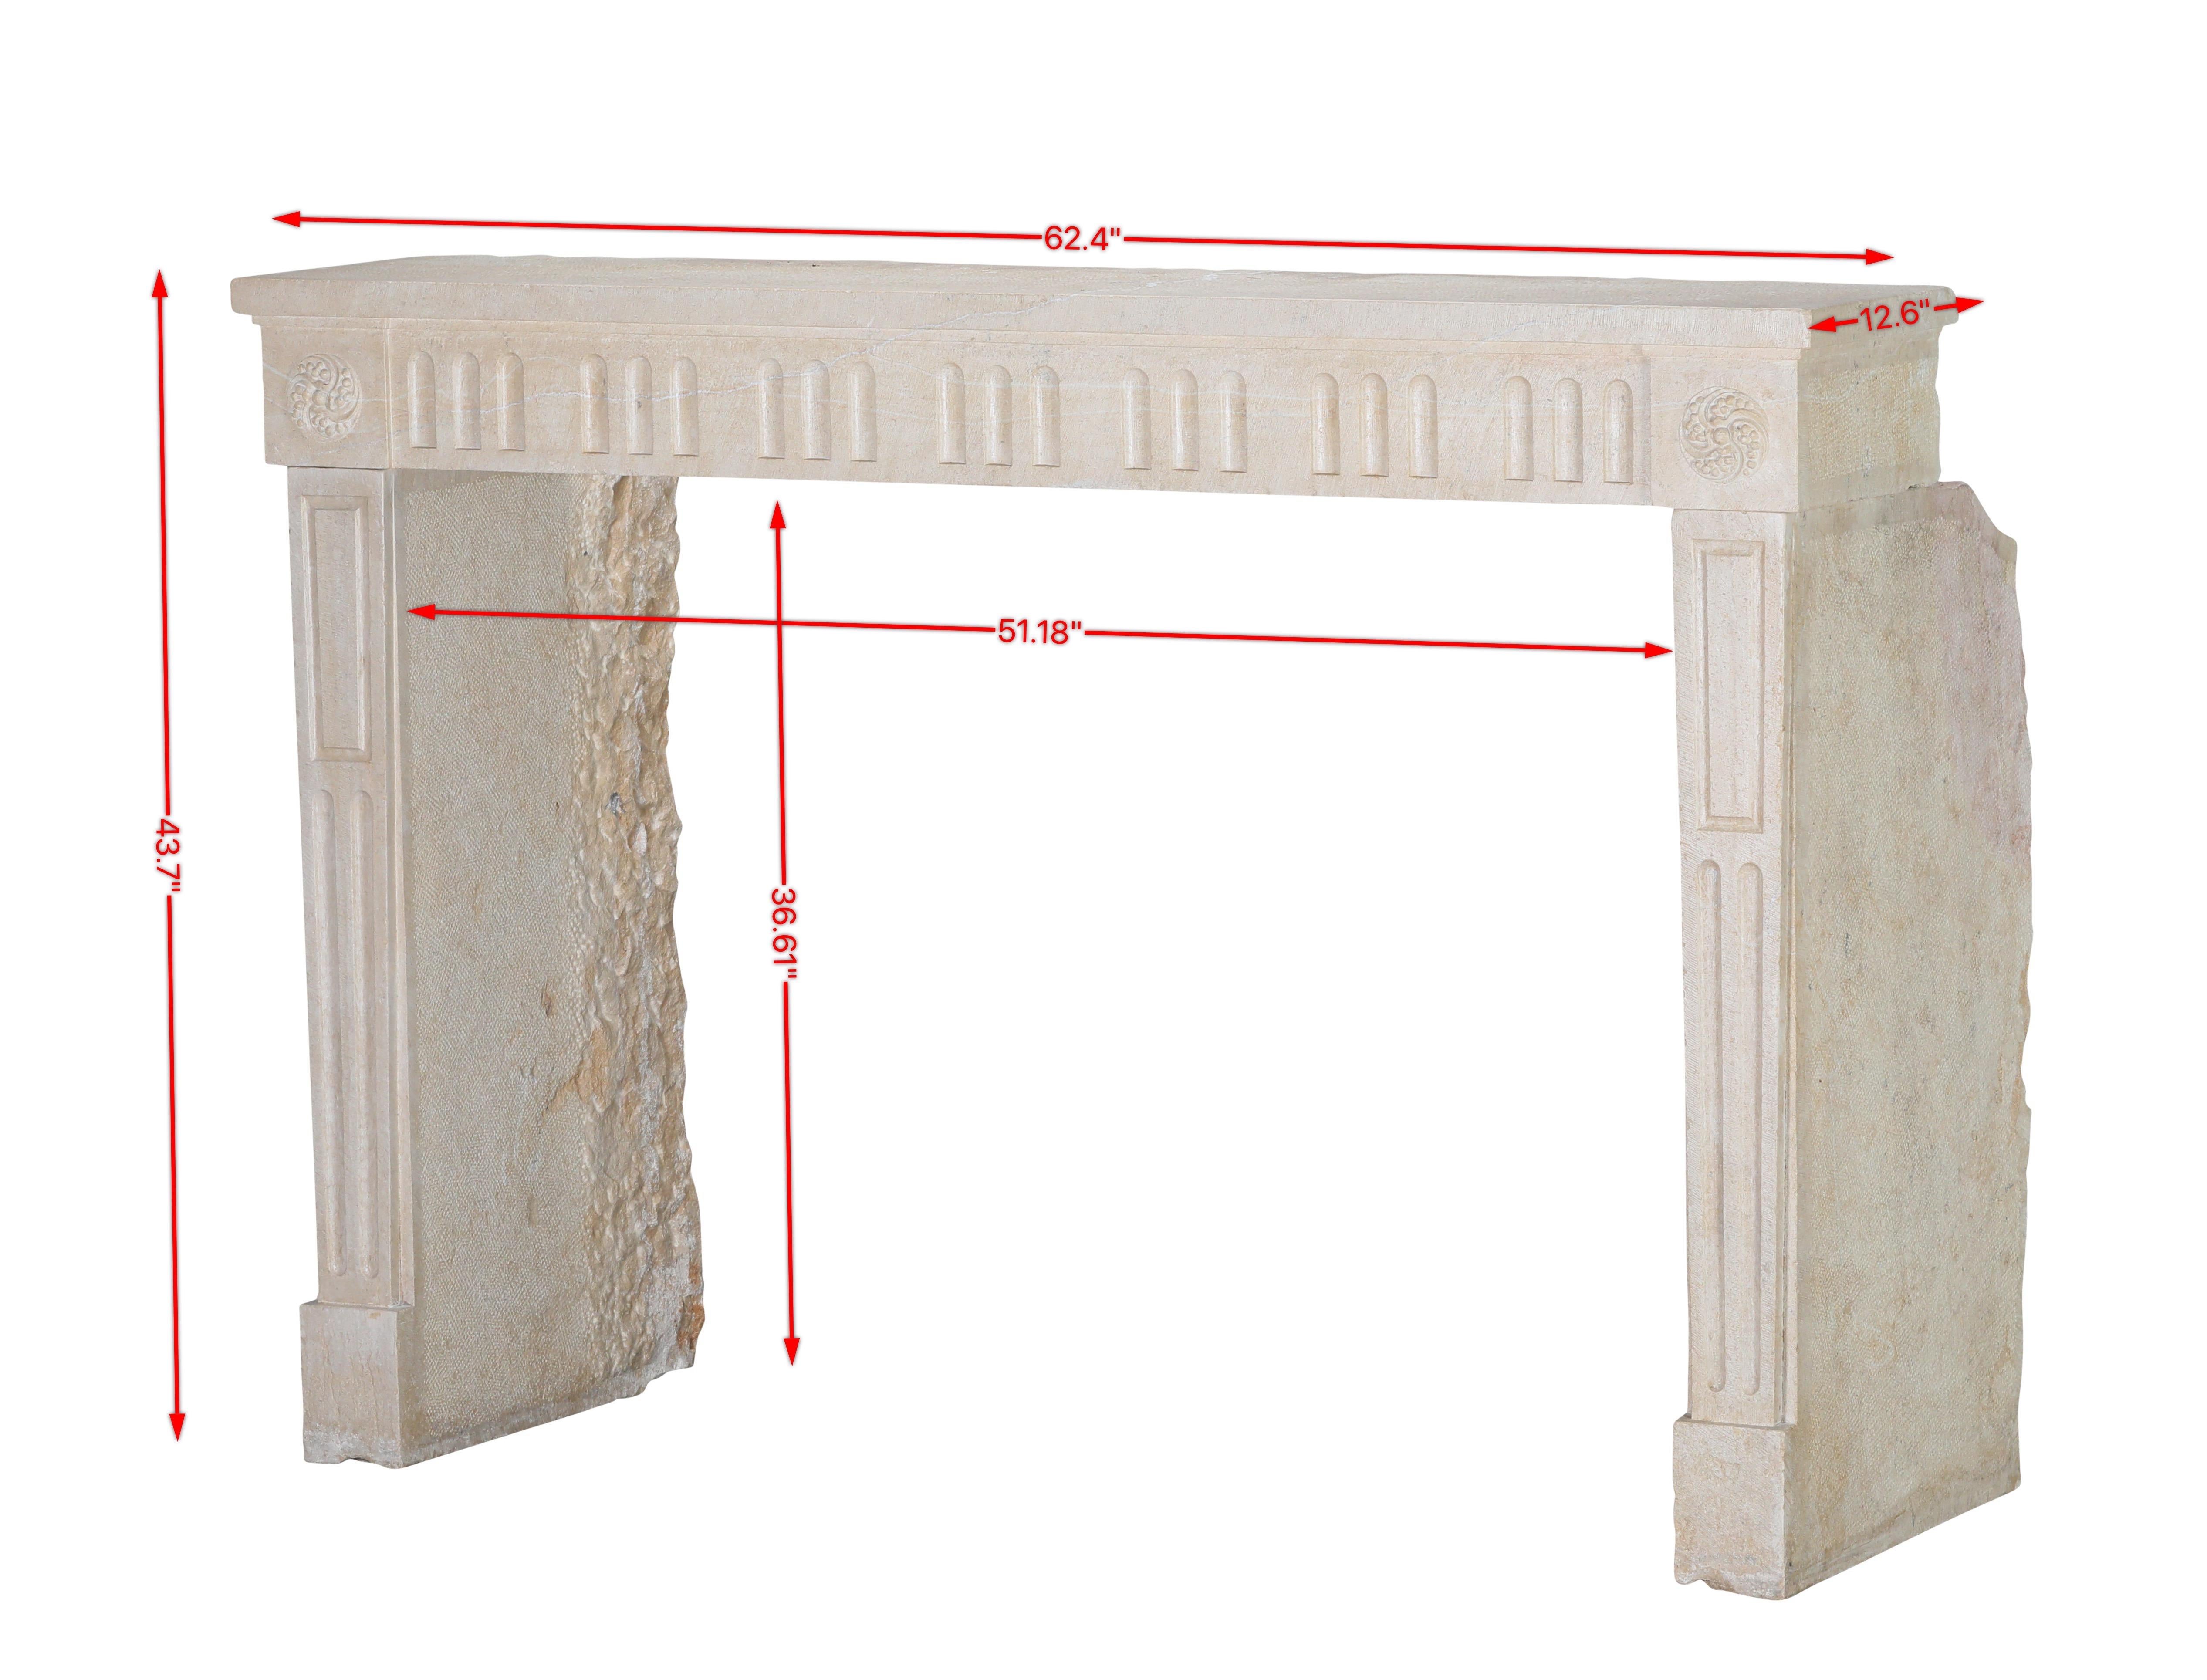 Louis XVI period limestone fireplace surround from France. Straight lines with a nice surface and feeling. French 18th century for timeless living with a French touch. Exceptional carving details of bunches of grapes on the main piece.